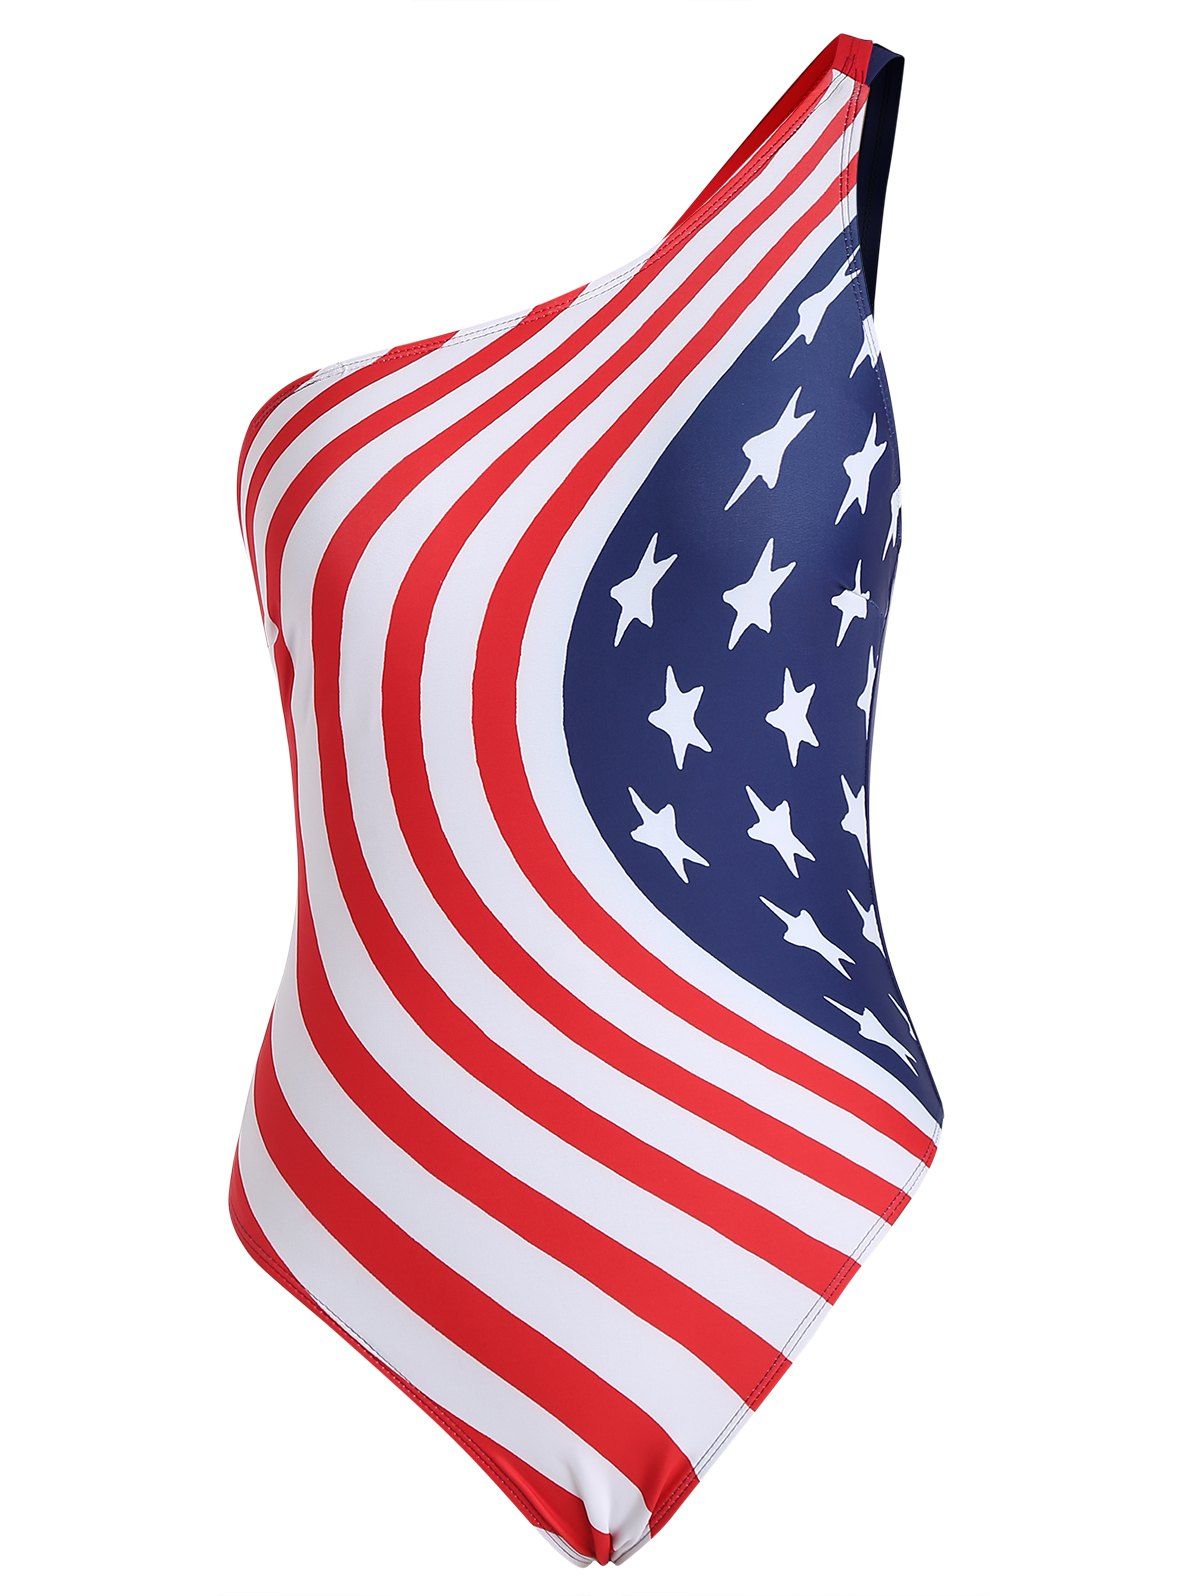 Beach American Flag One-piece Swimsuit One Shoulder Stars Striped Print Padded Cut Out Back Swimwear - multicolor XL